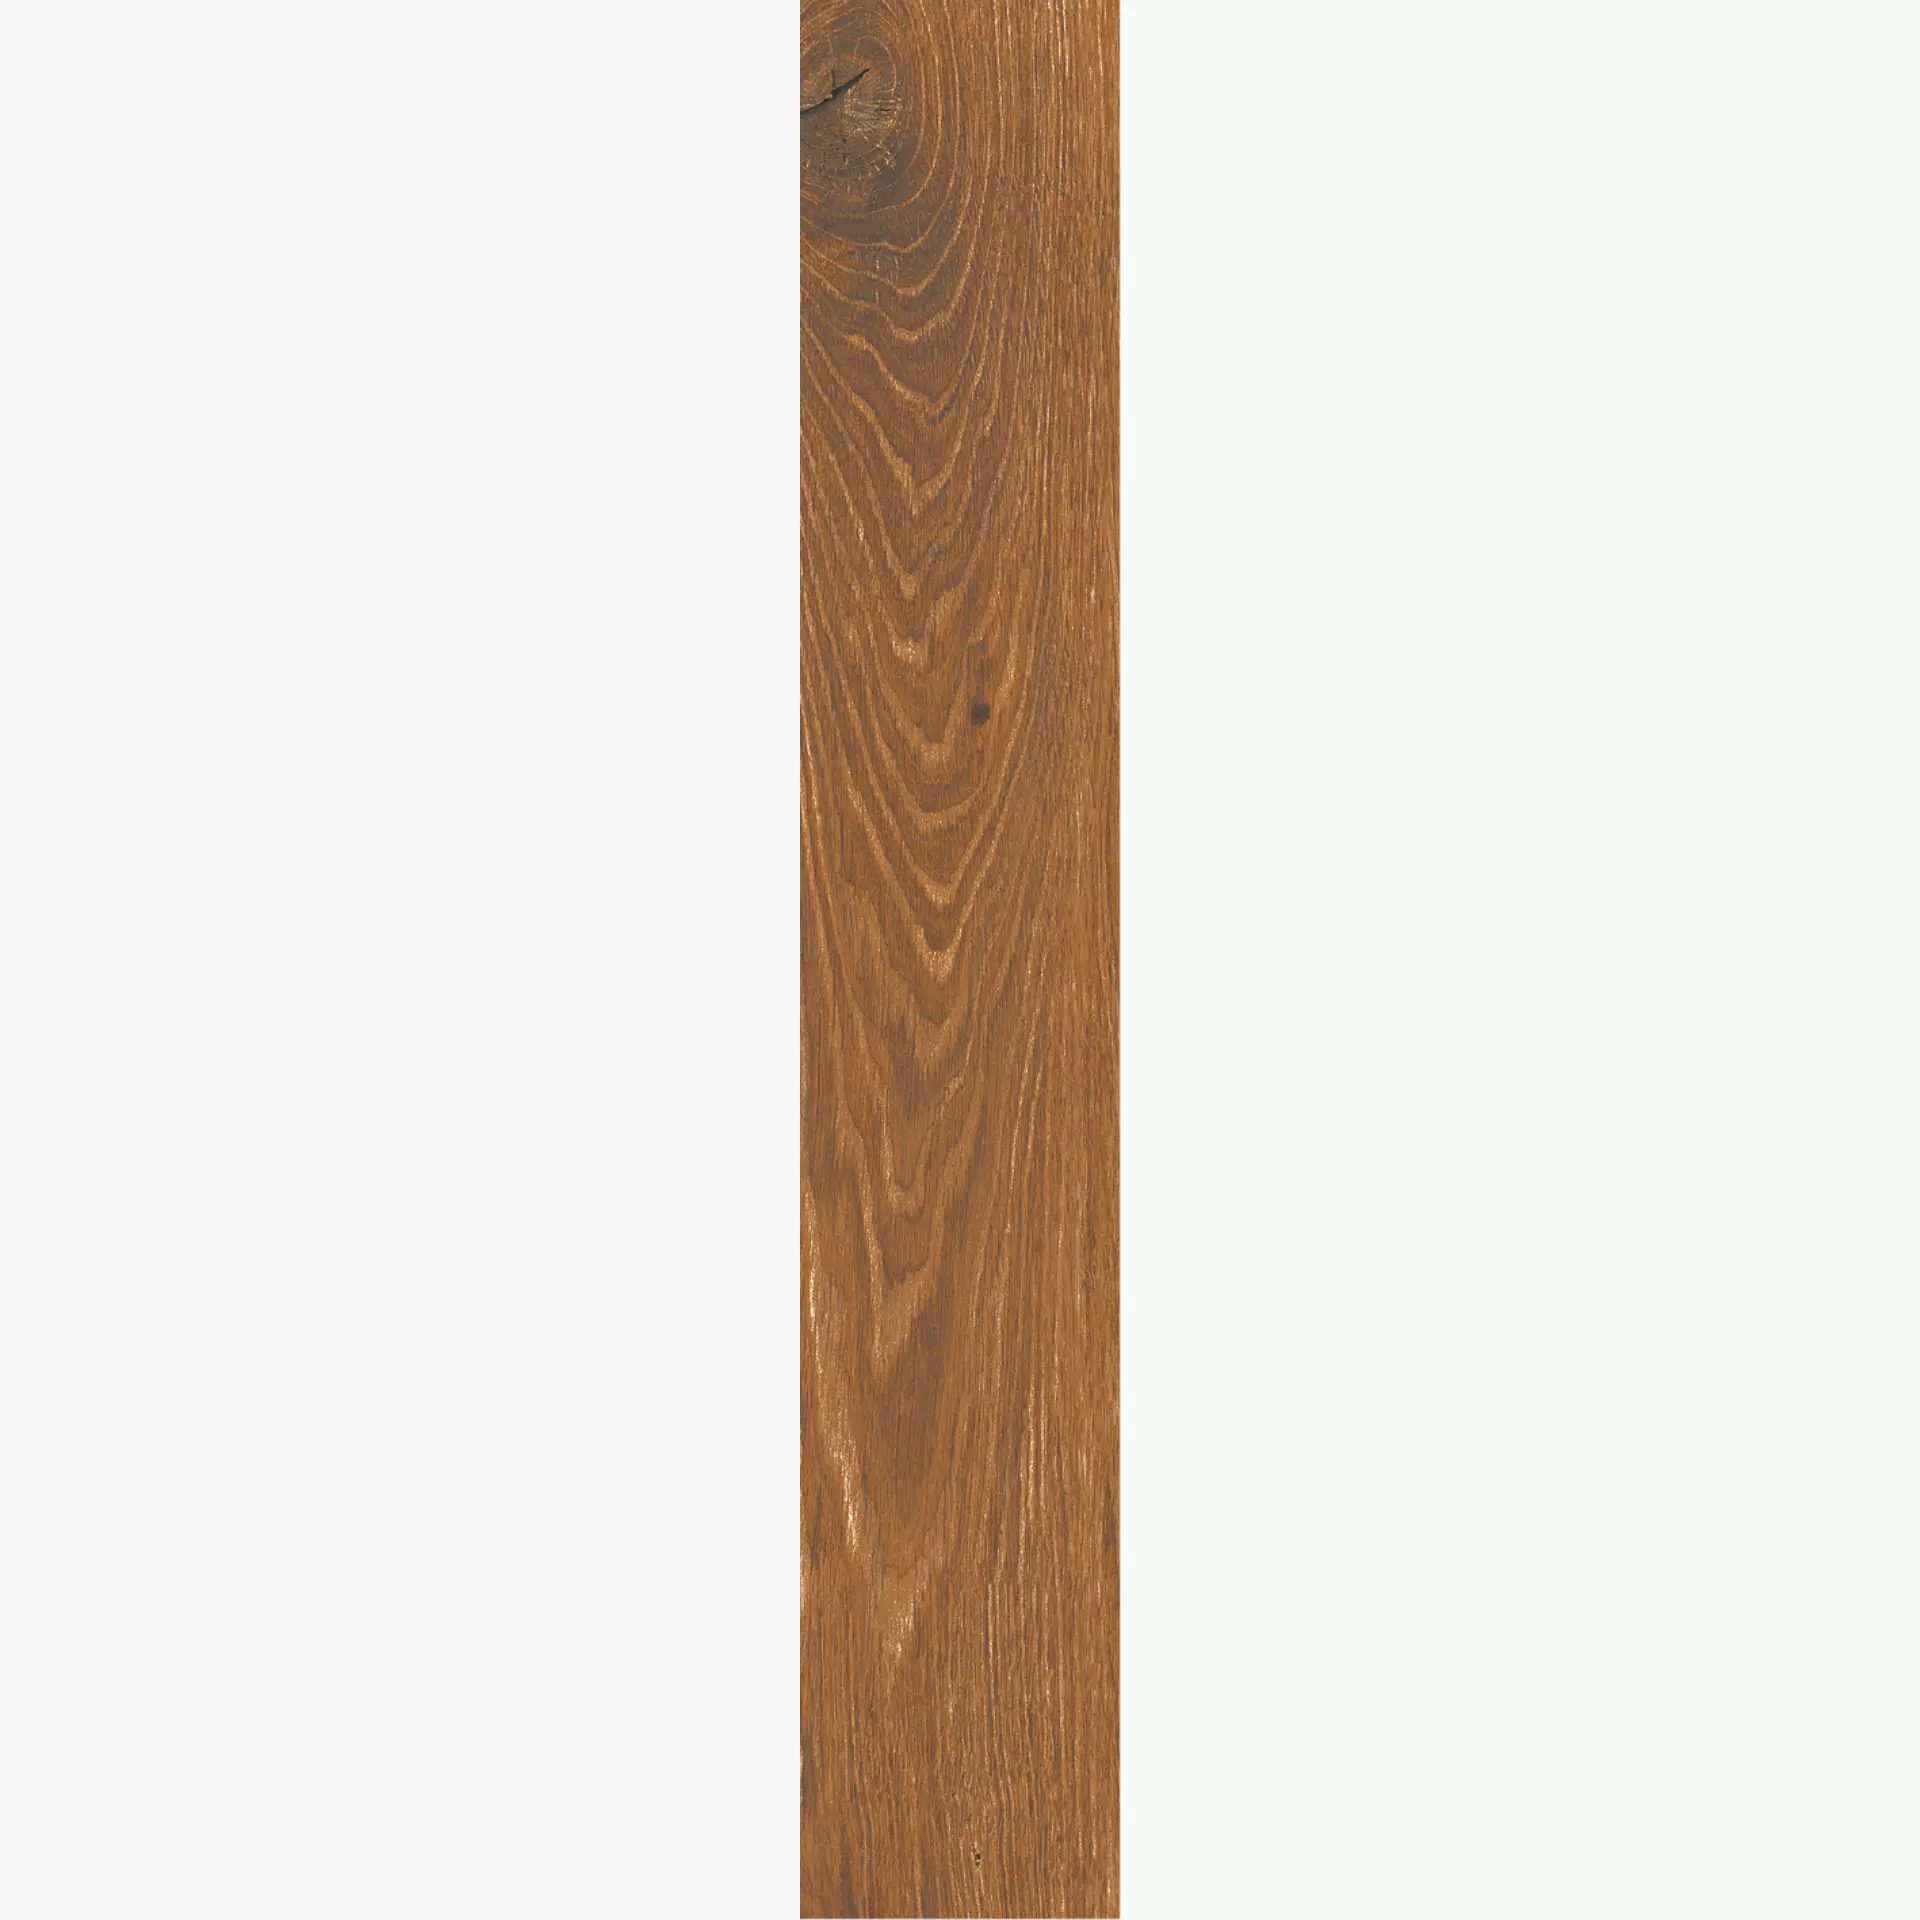 Novabell Artwood Cherry Naturale AWD51RT 20x120cm rectified 9mm